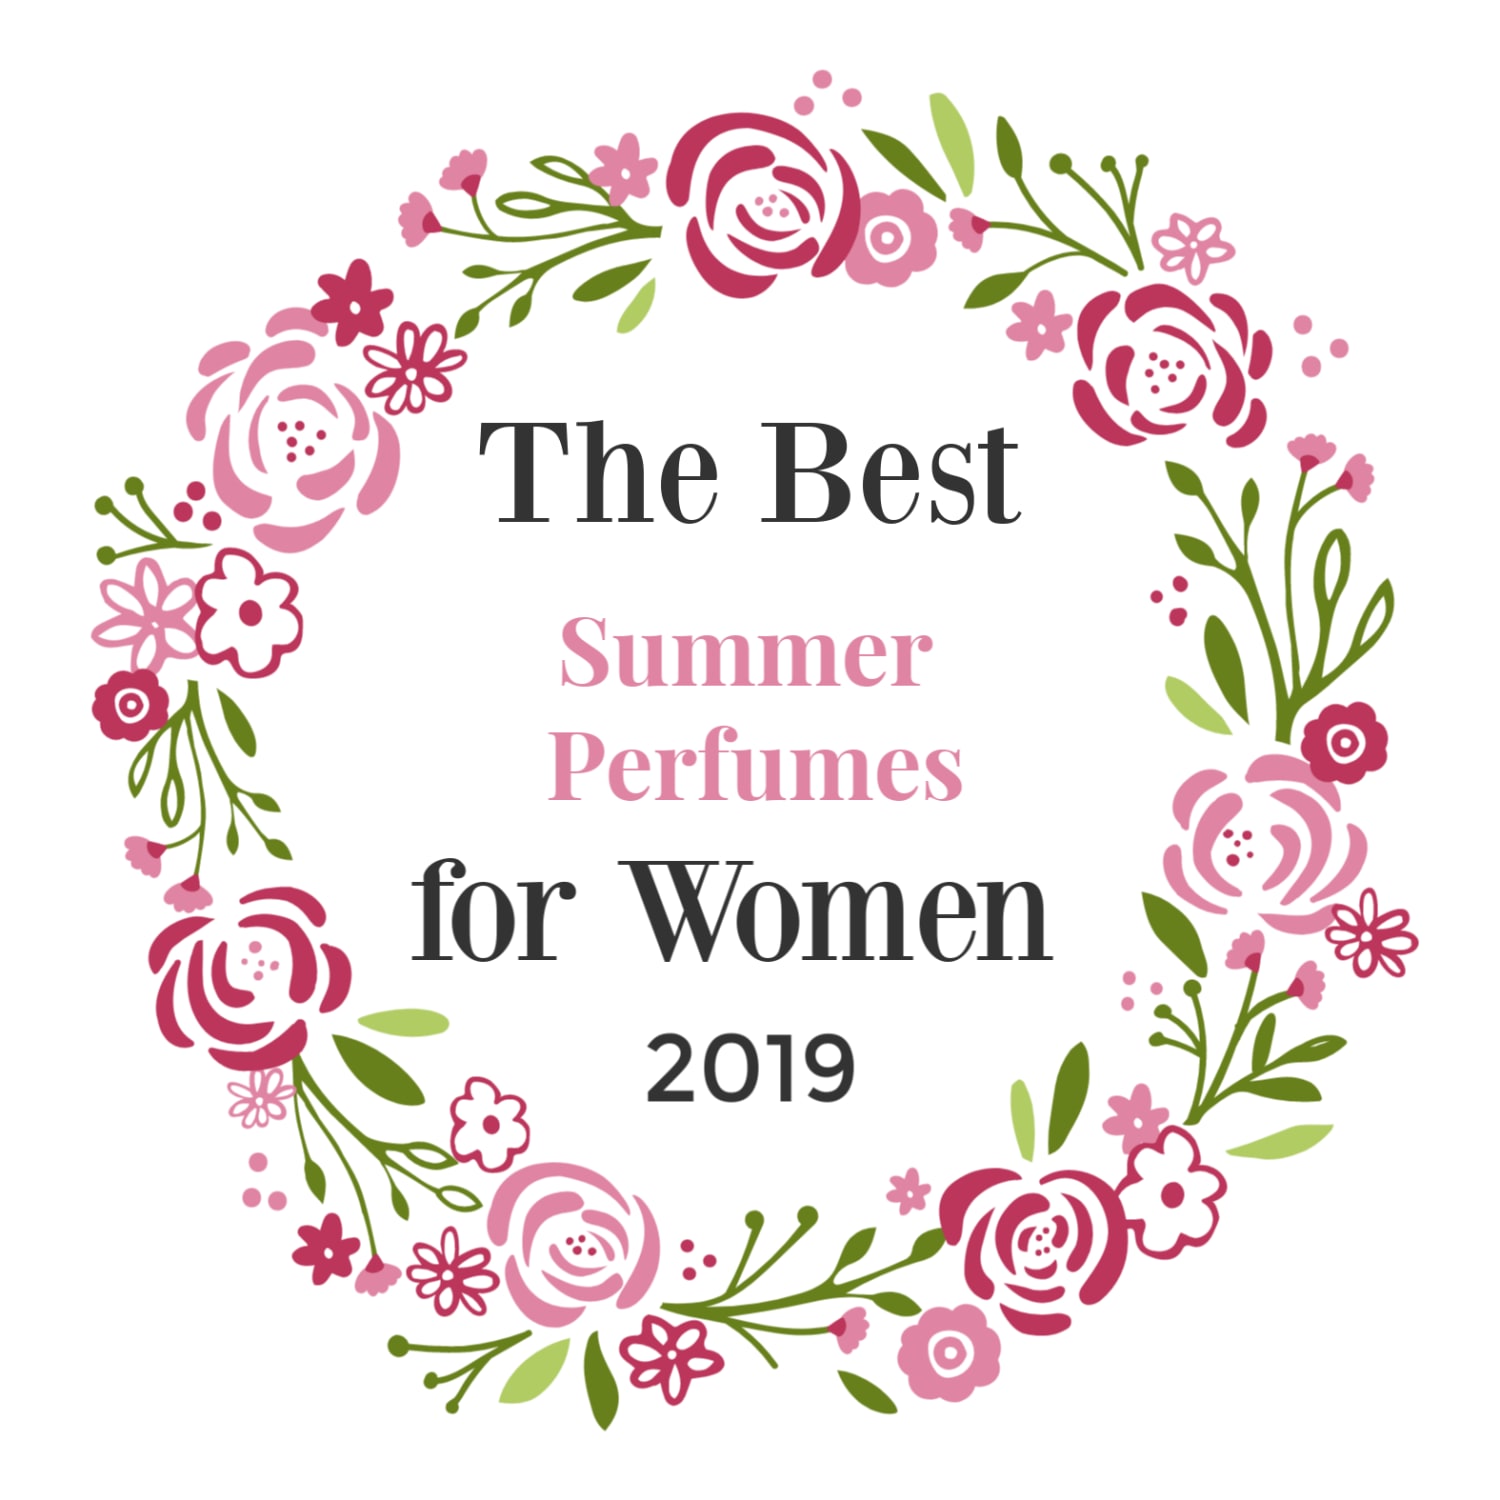 The Best Summer Perfumes for Women 2019